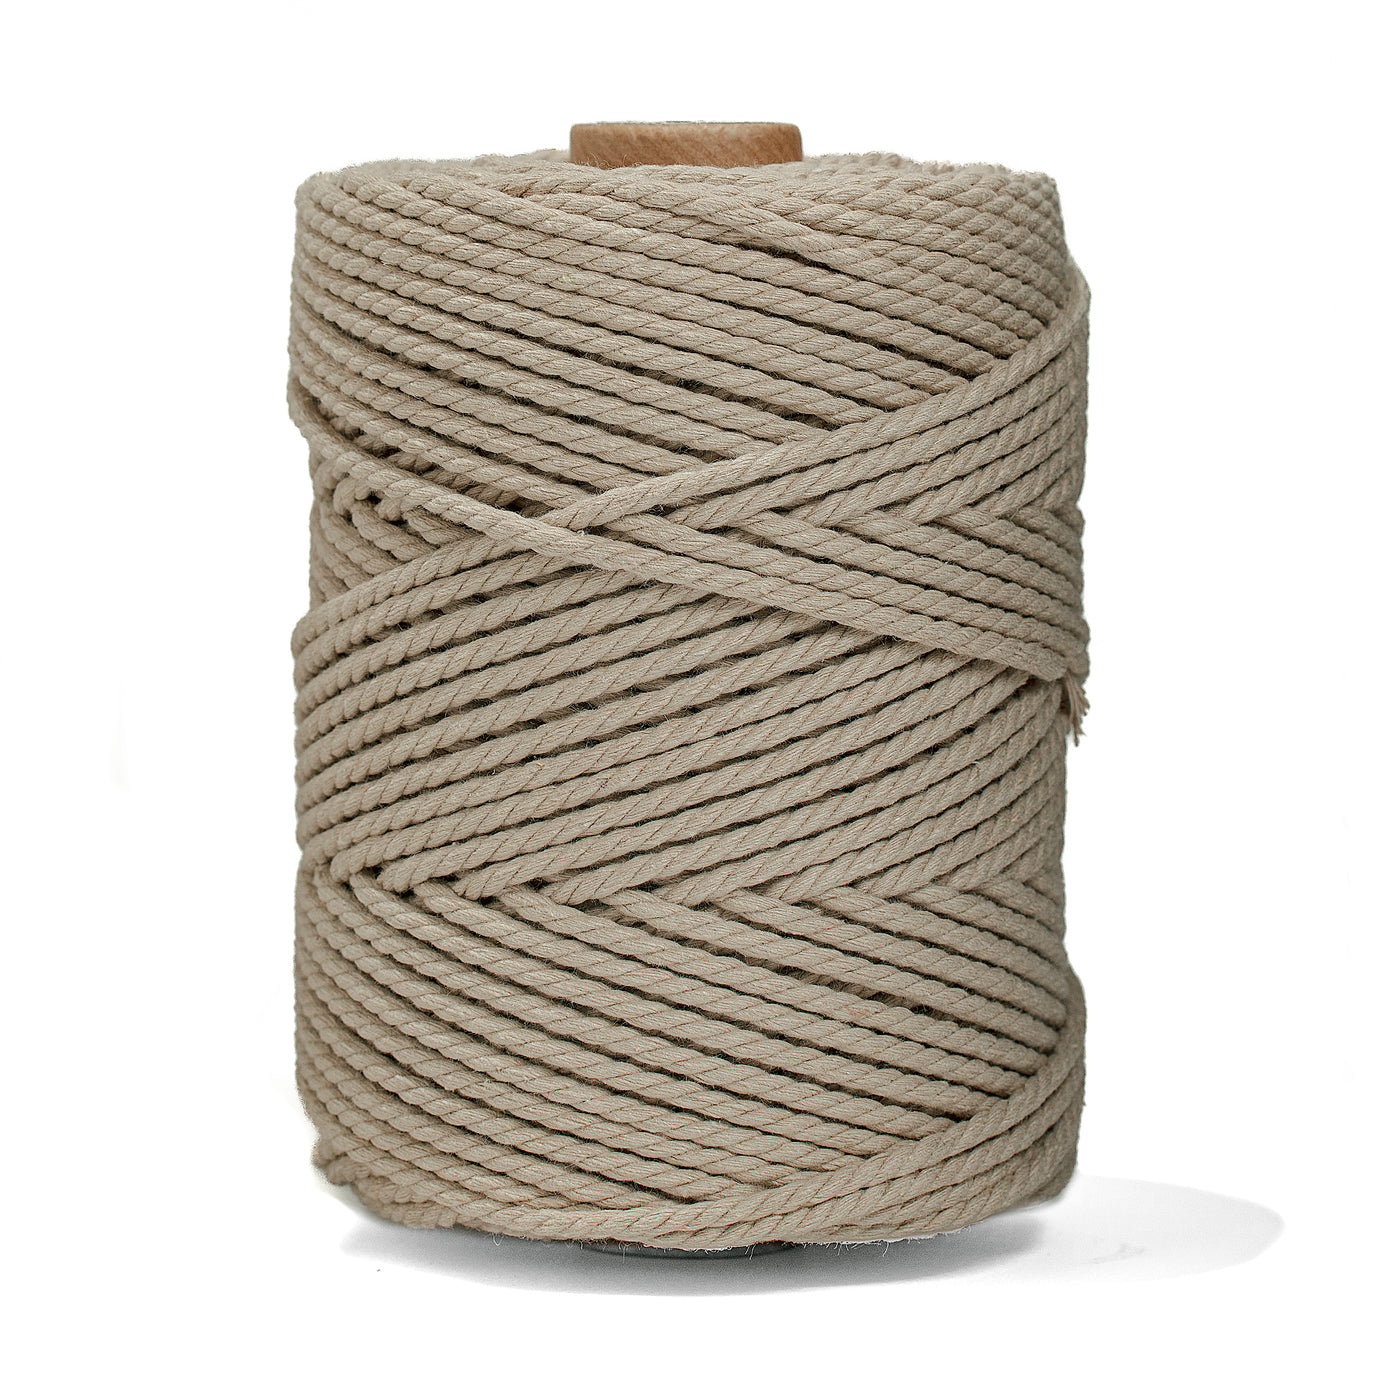 COTTON ROPE ZERO WASTE 3 MM - 3 PLY - BEIGE COLOR